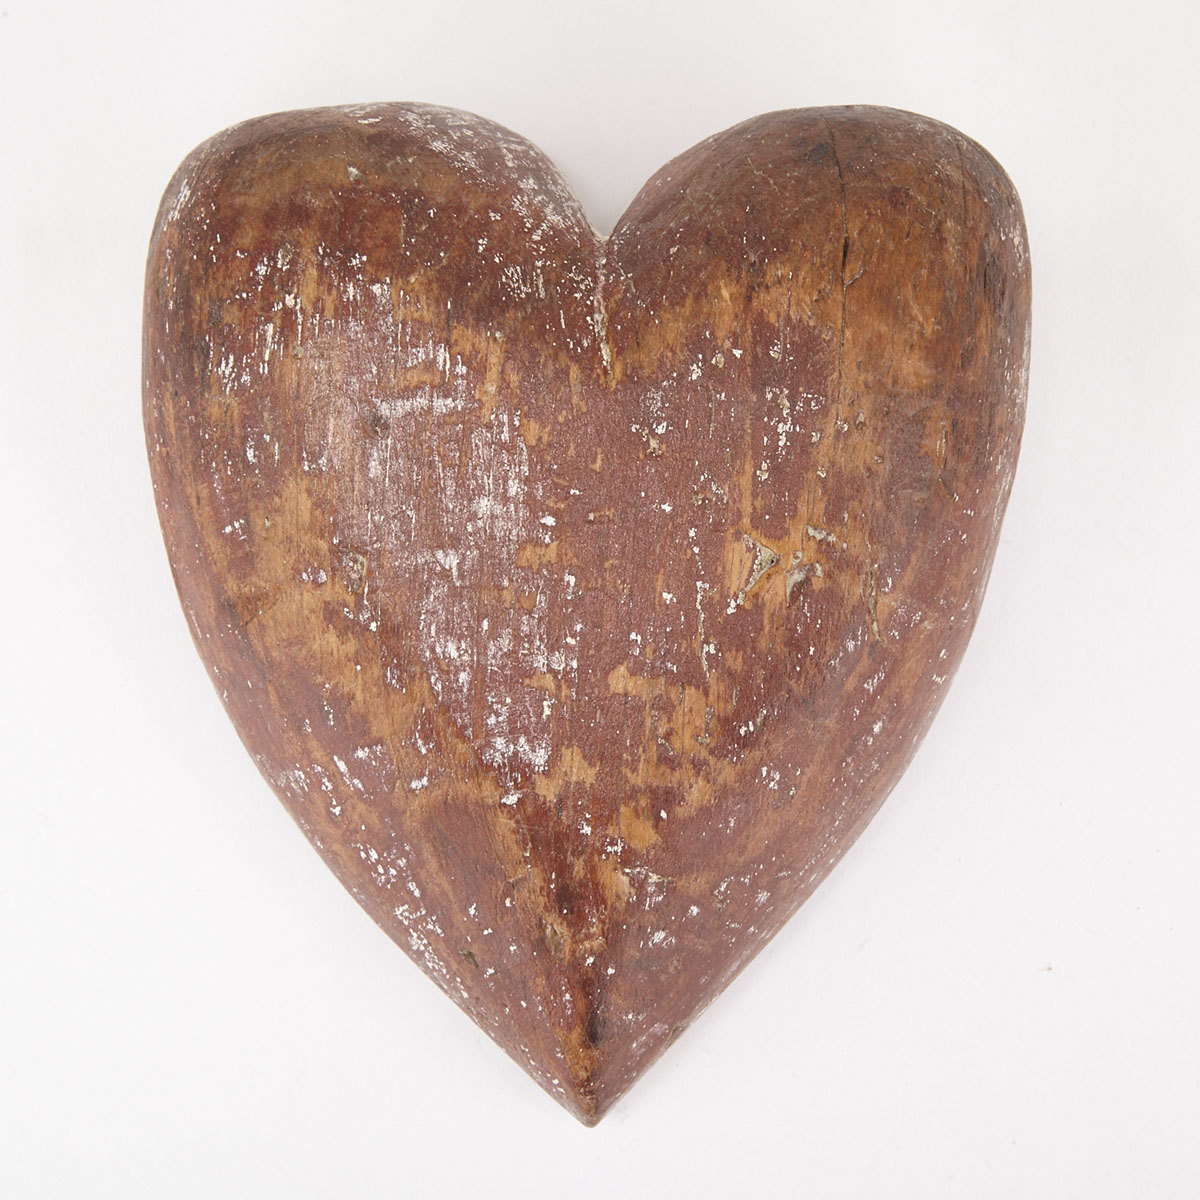 Carved and Painted Heart Form Architectural Element, 19th century